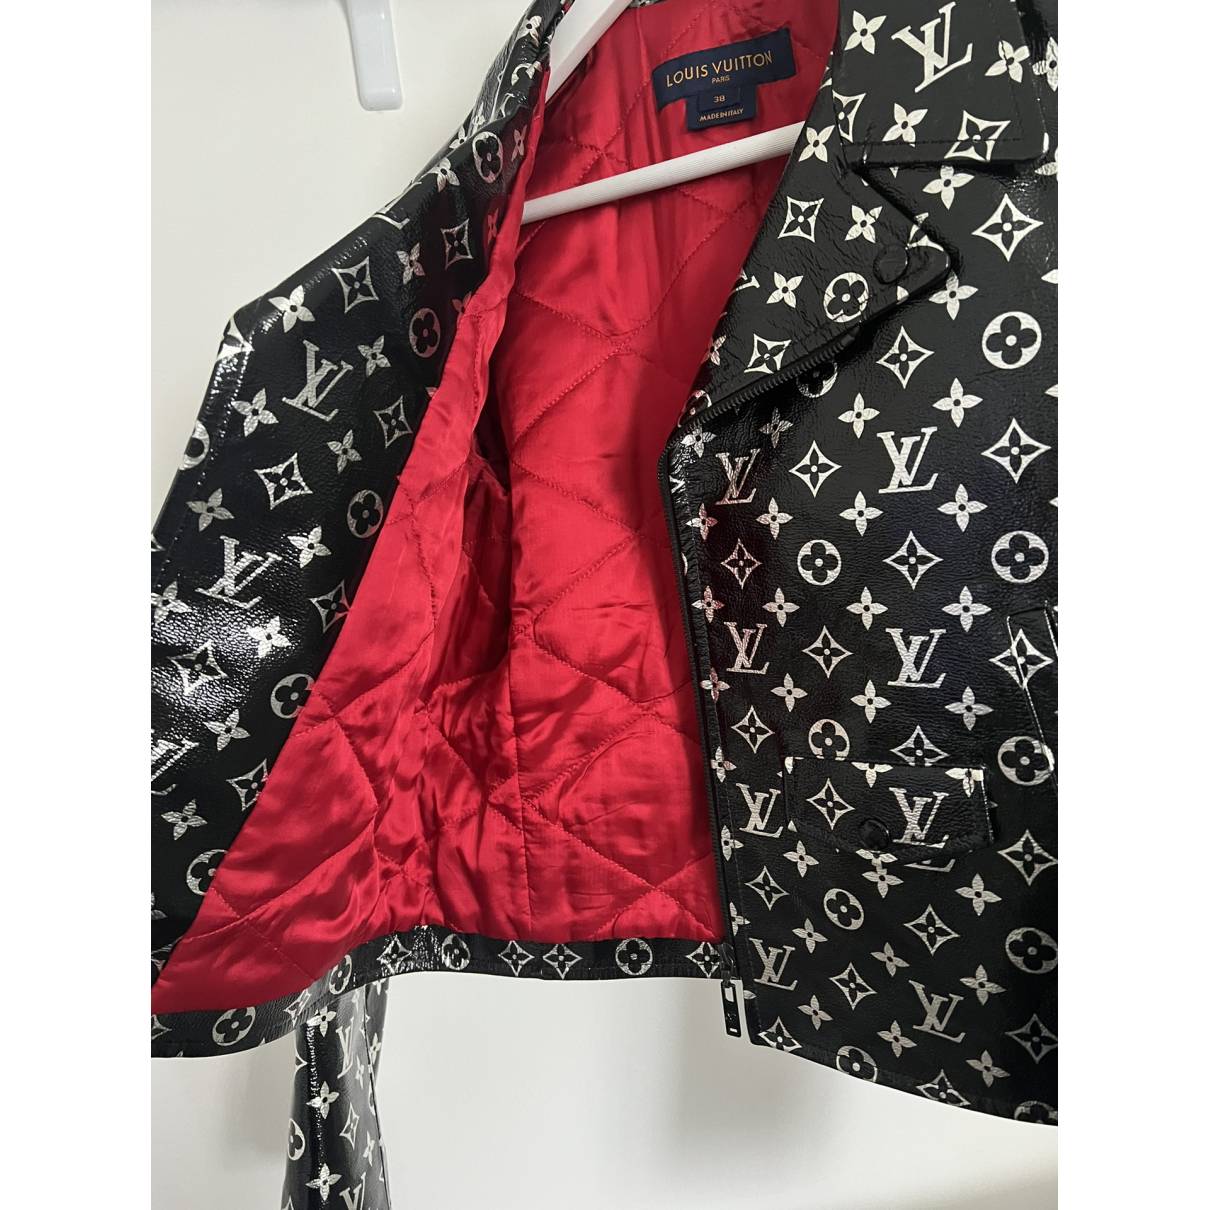 Louis Vuitton - Authenticated Jacket - Leather Black for Women, Never Worn